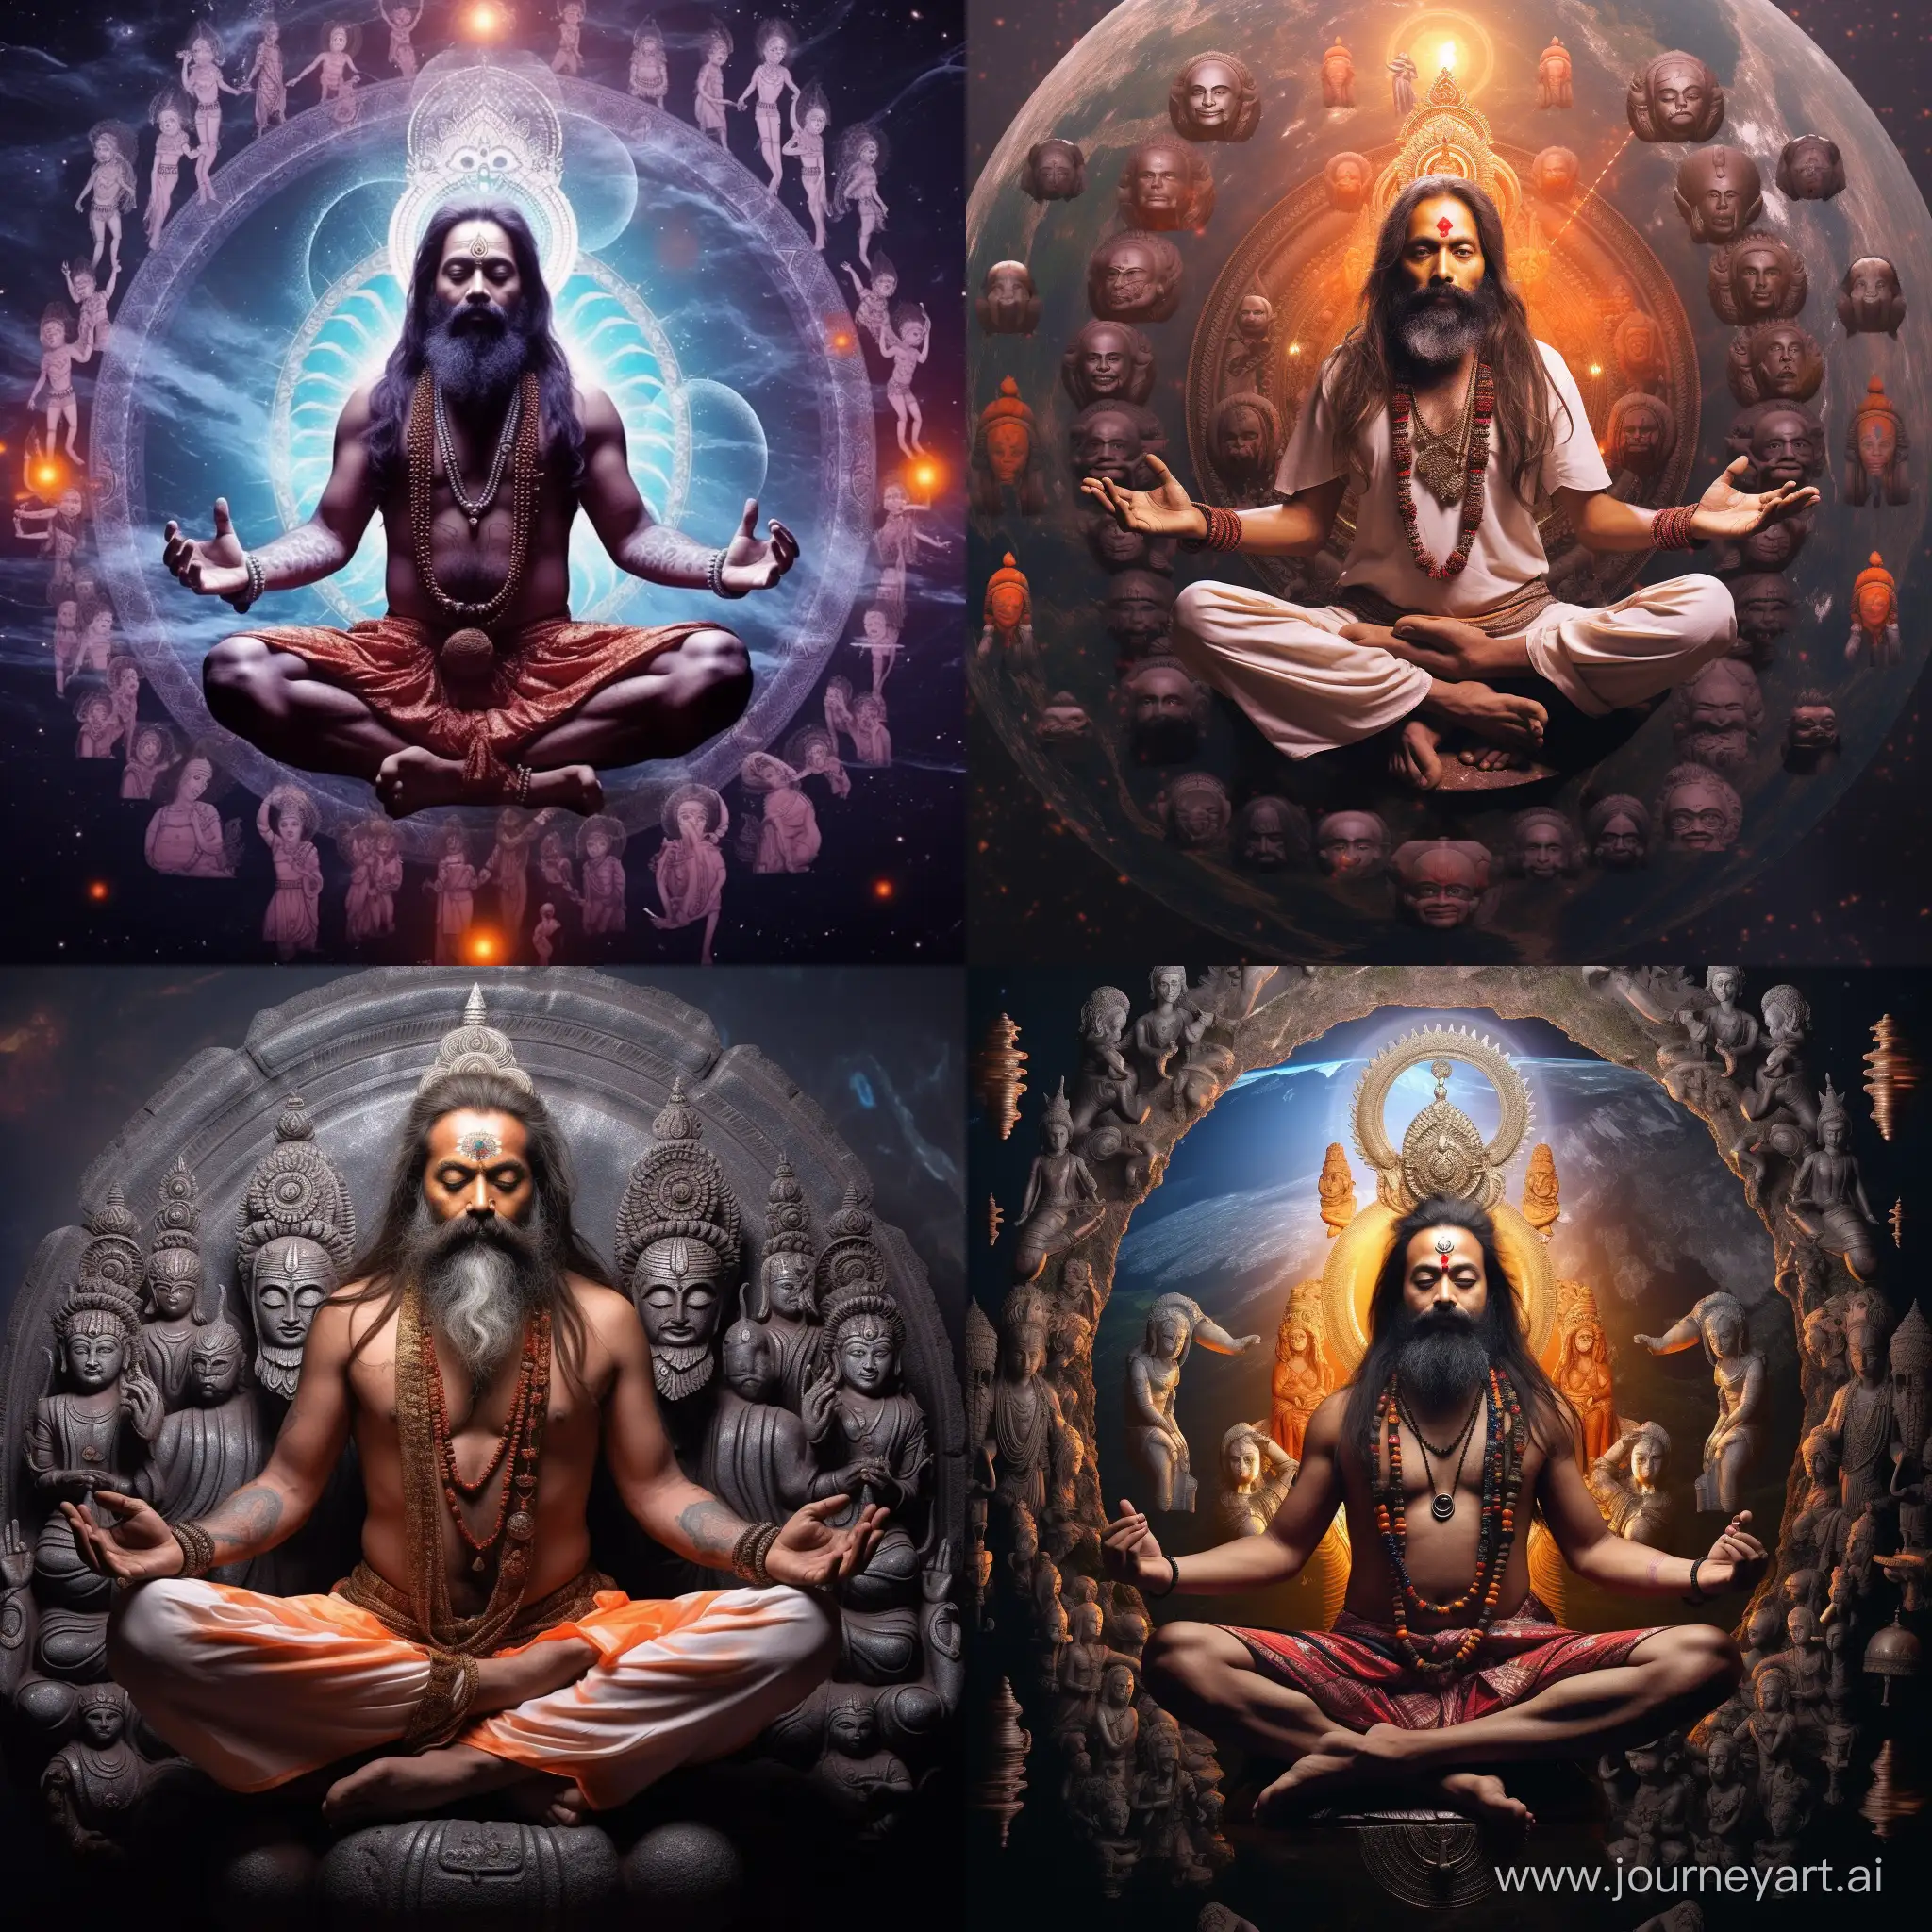 Indian god Shiva there is a bearded with four arms sitting cross-legged in a cosmic setting. He is surrounded by multiple heads and planets.